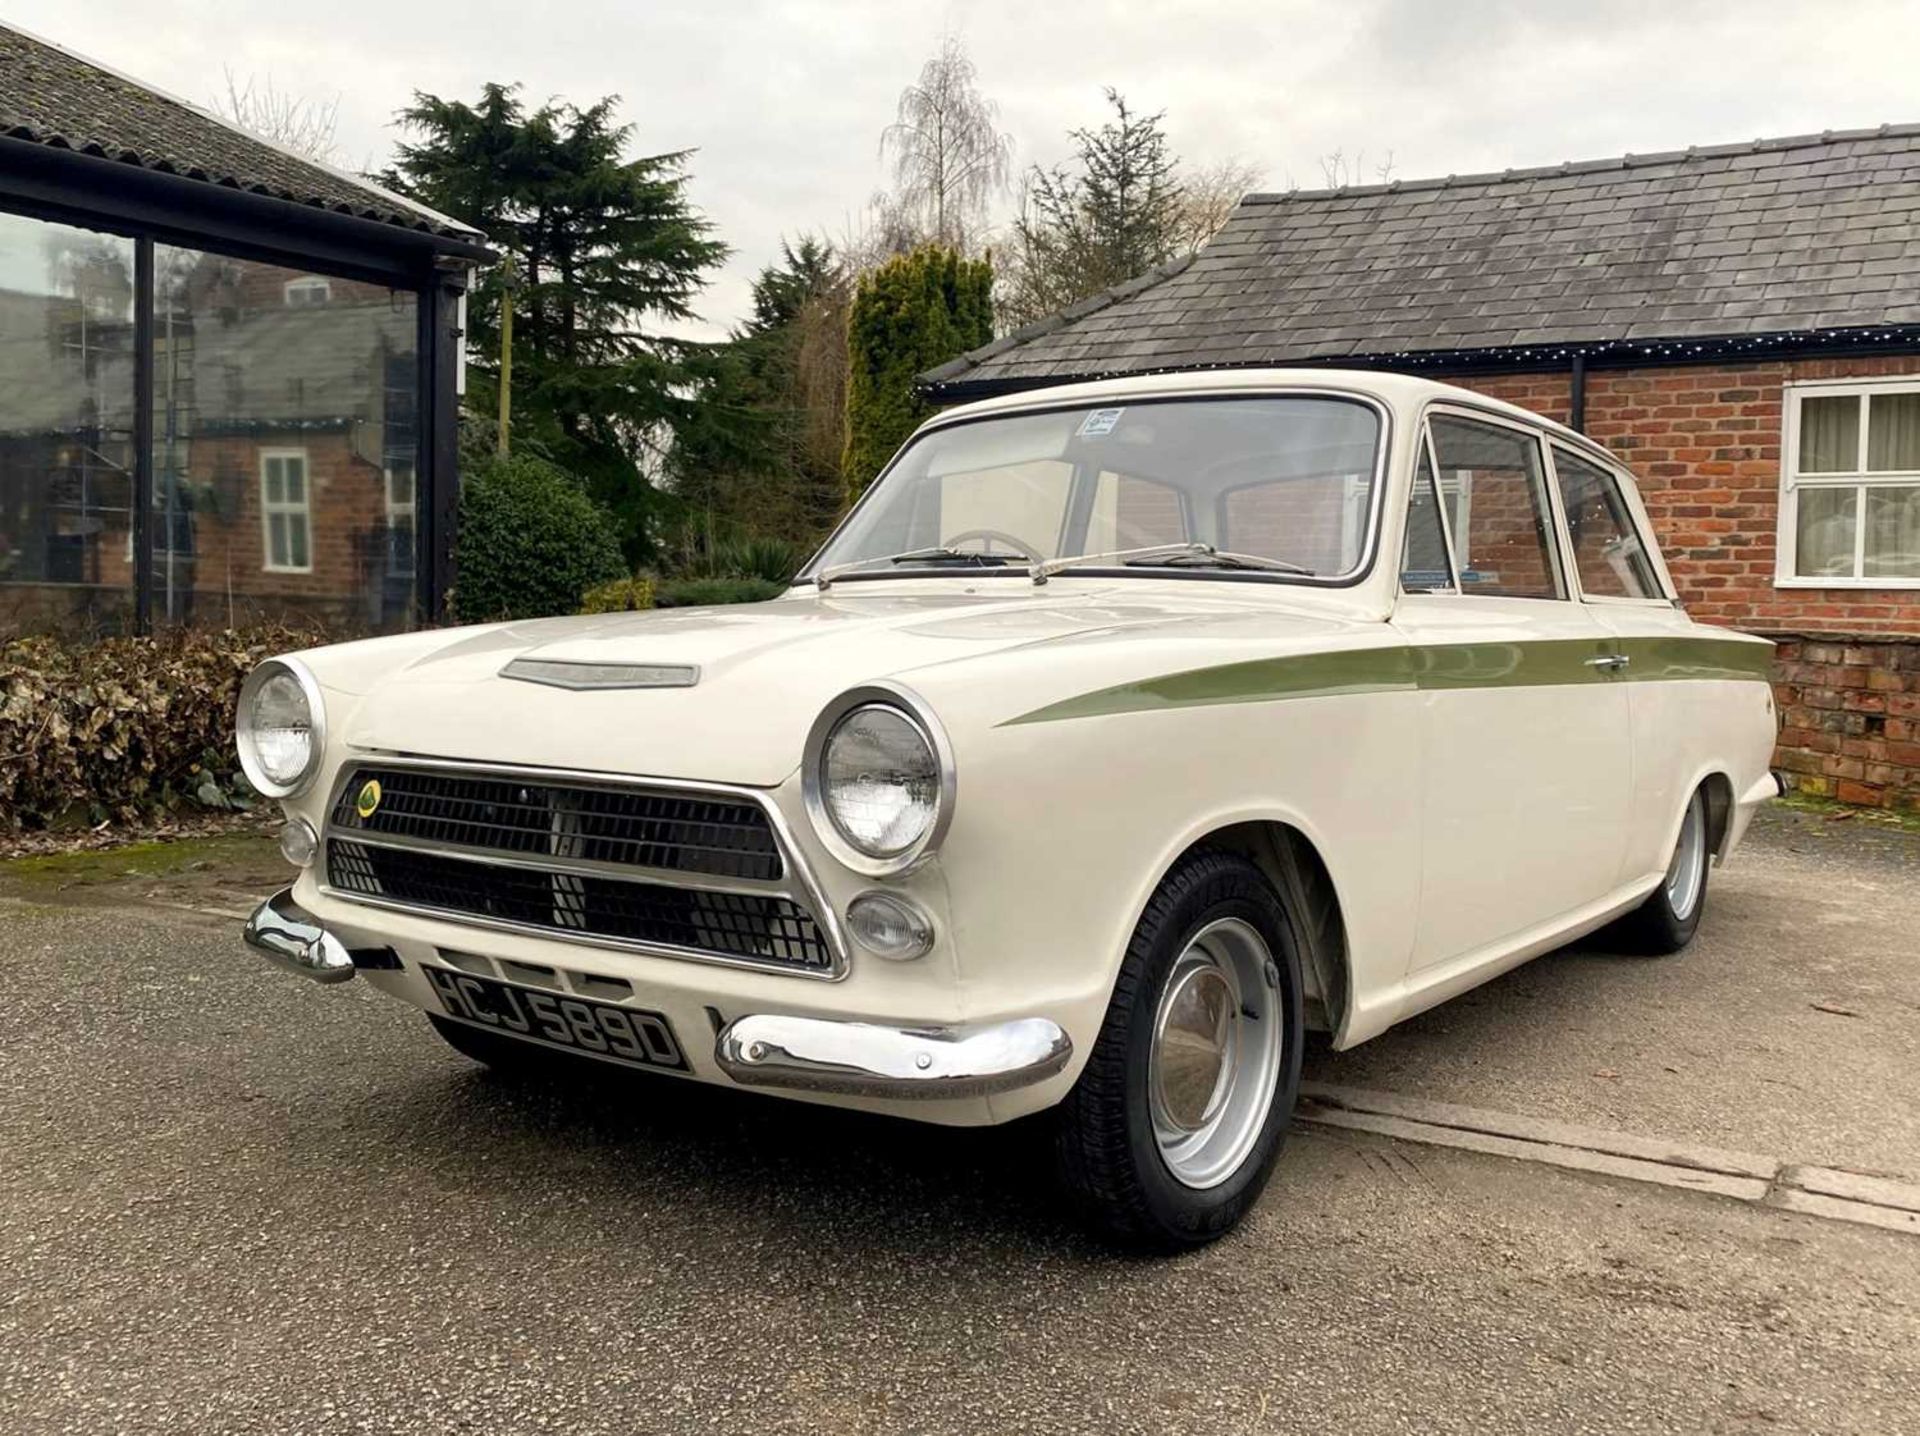 1963 Ford Lotus Cortina Pre-Aeroflow model, fitted with A-frame rear suspension - Image 8 of 58